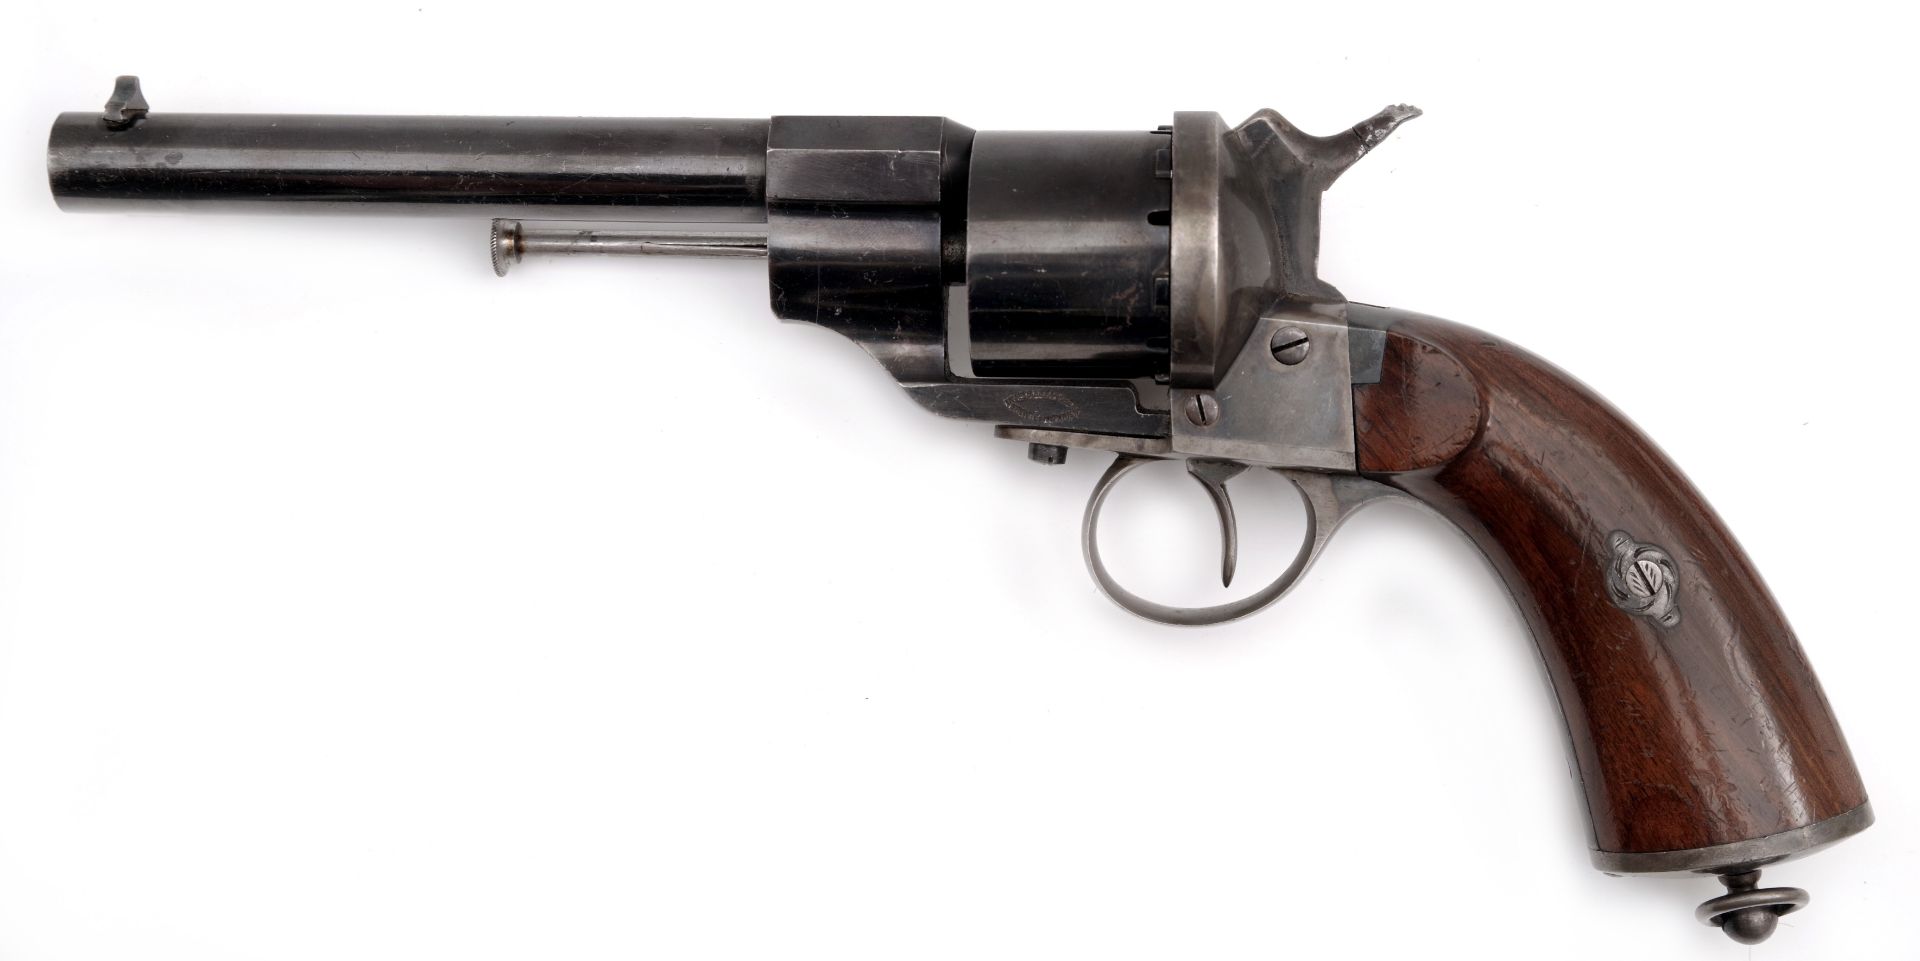 A Sweden Army/Navy Model 1863-79 Revolver by E. LEFAUCHEUX (converted into central fire) - Image 7 of 7